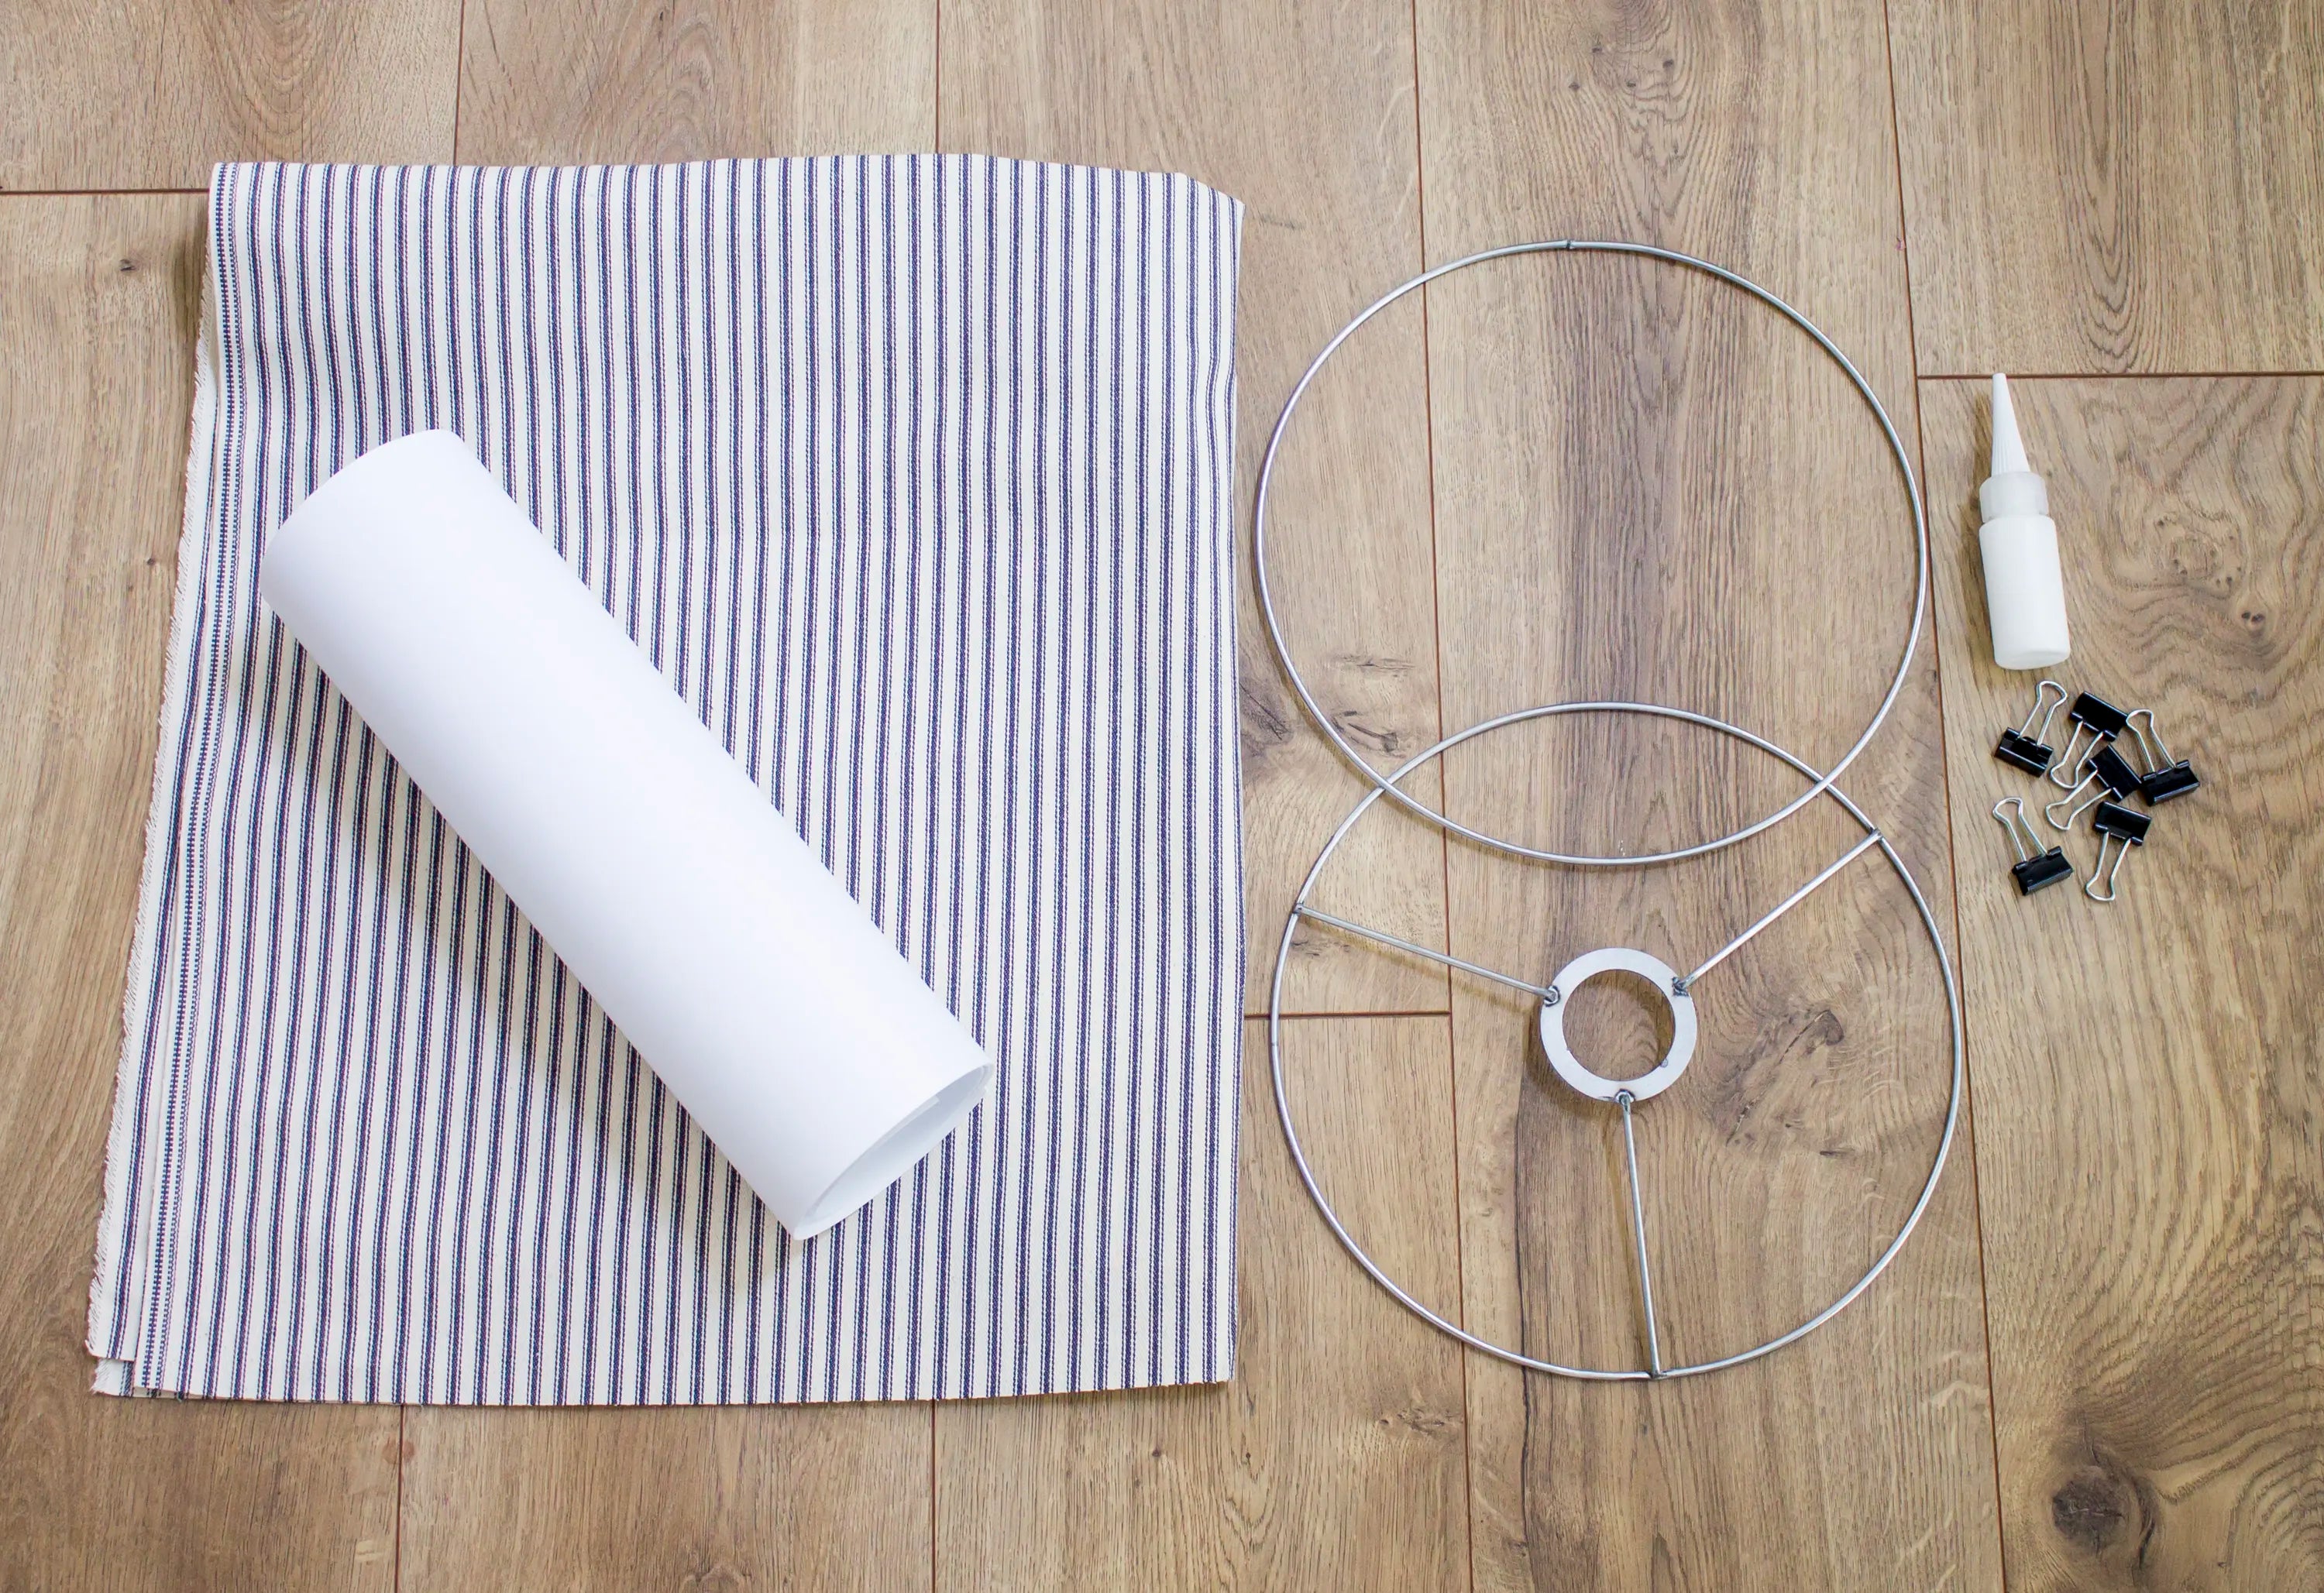 Hymela How to DIY your own lampshades?